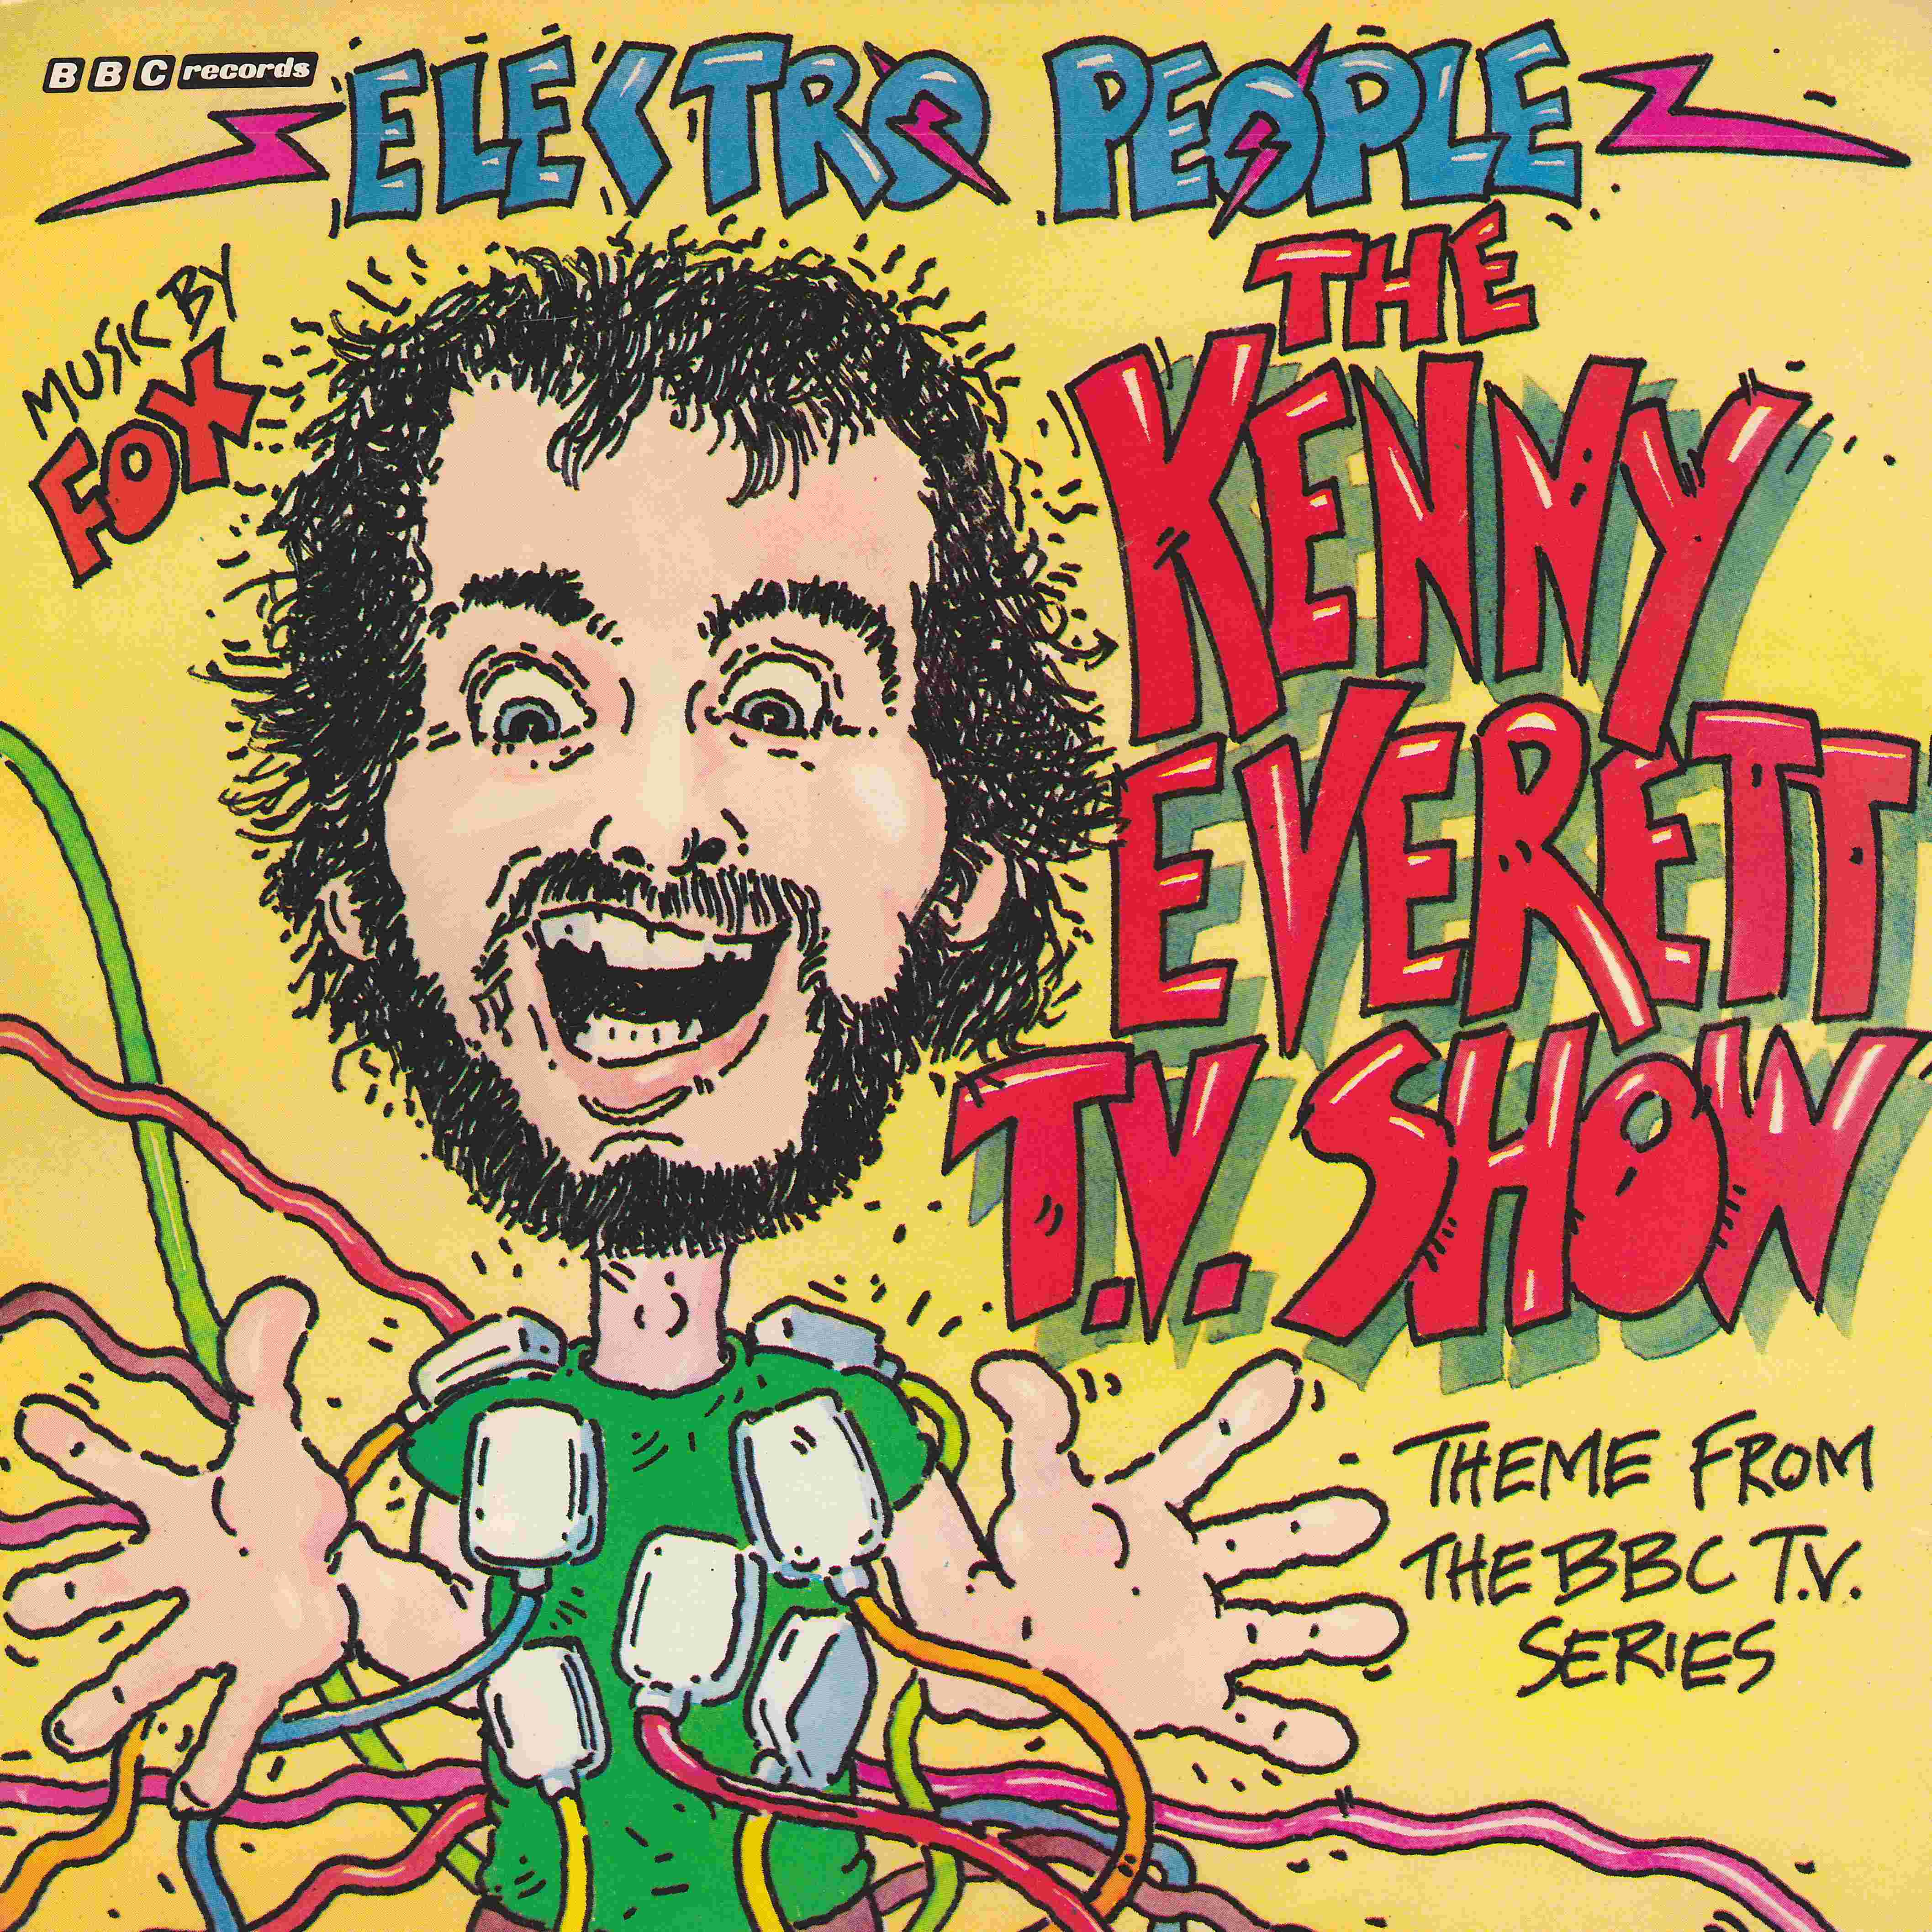 Picture of RESL 115 Electro people (The Kenny Everett television show) by artist Kenny Young / Fox from the BBC records and Tapes library